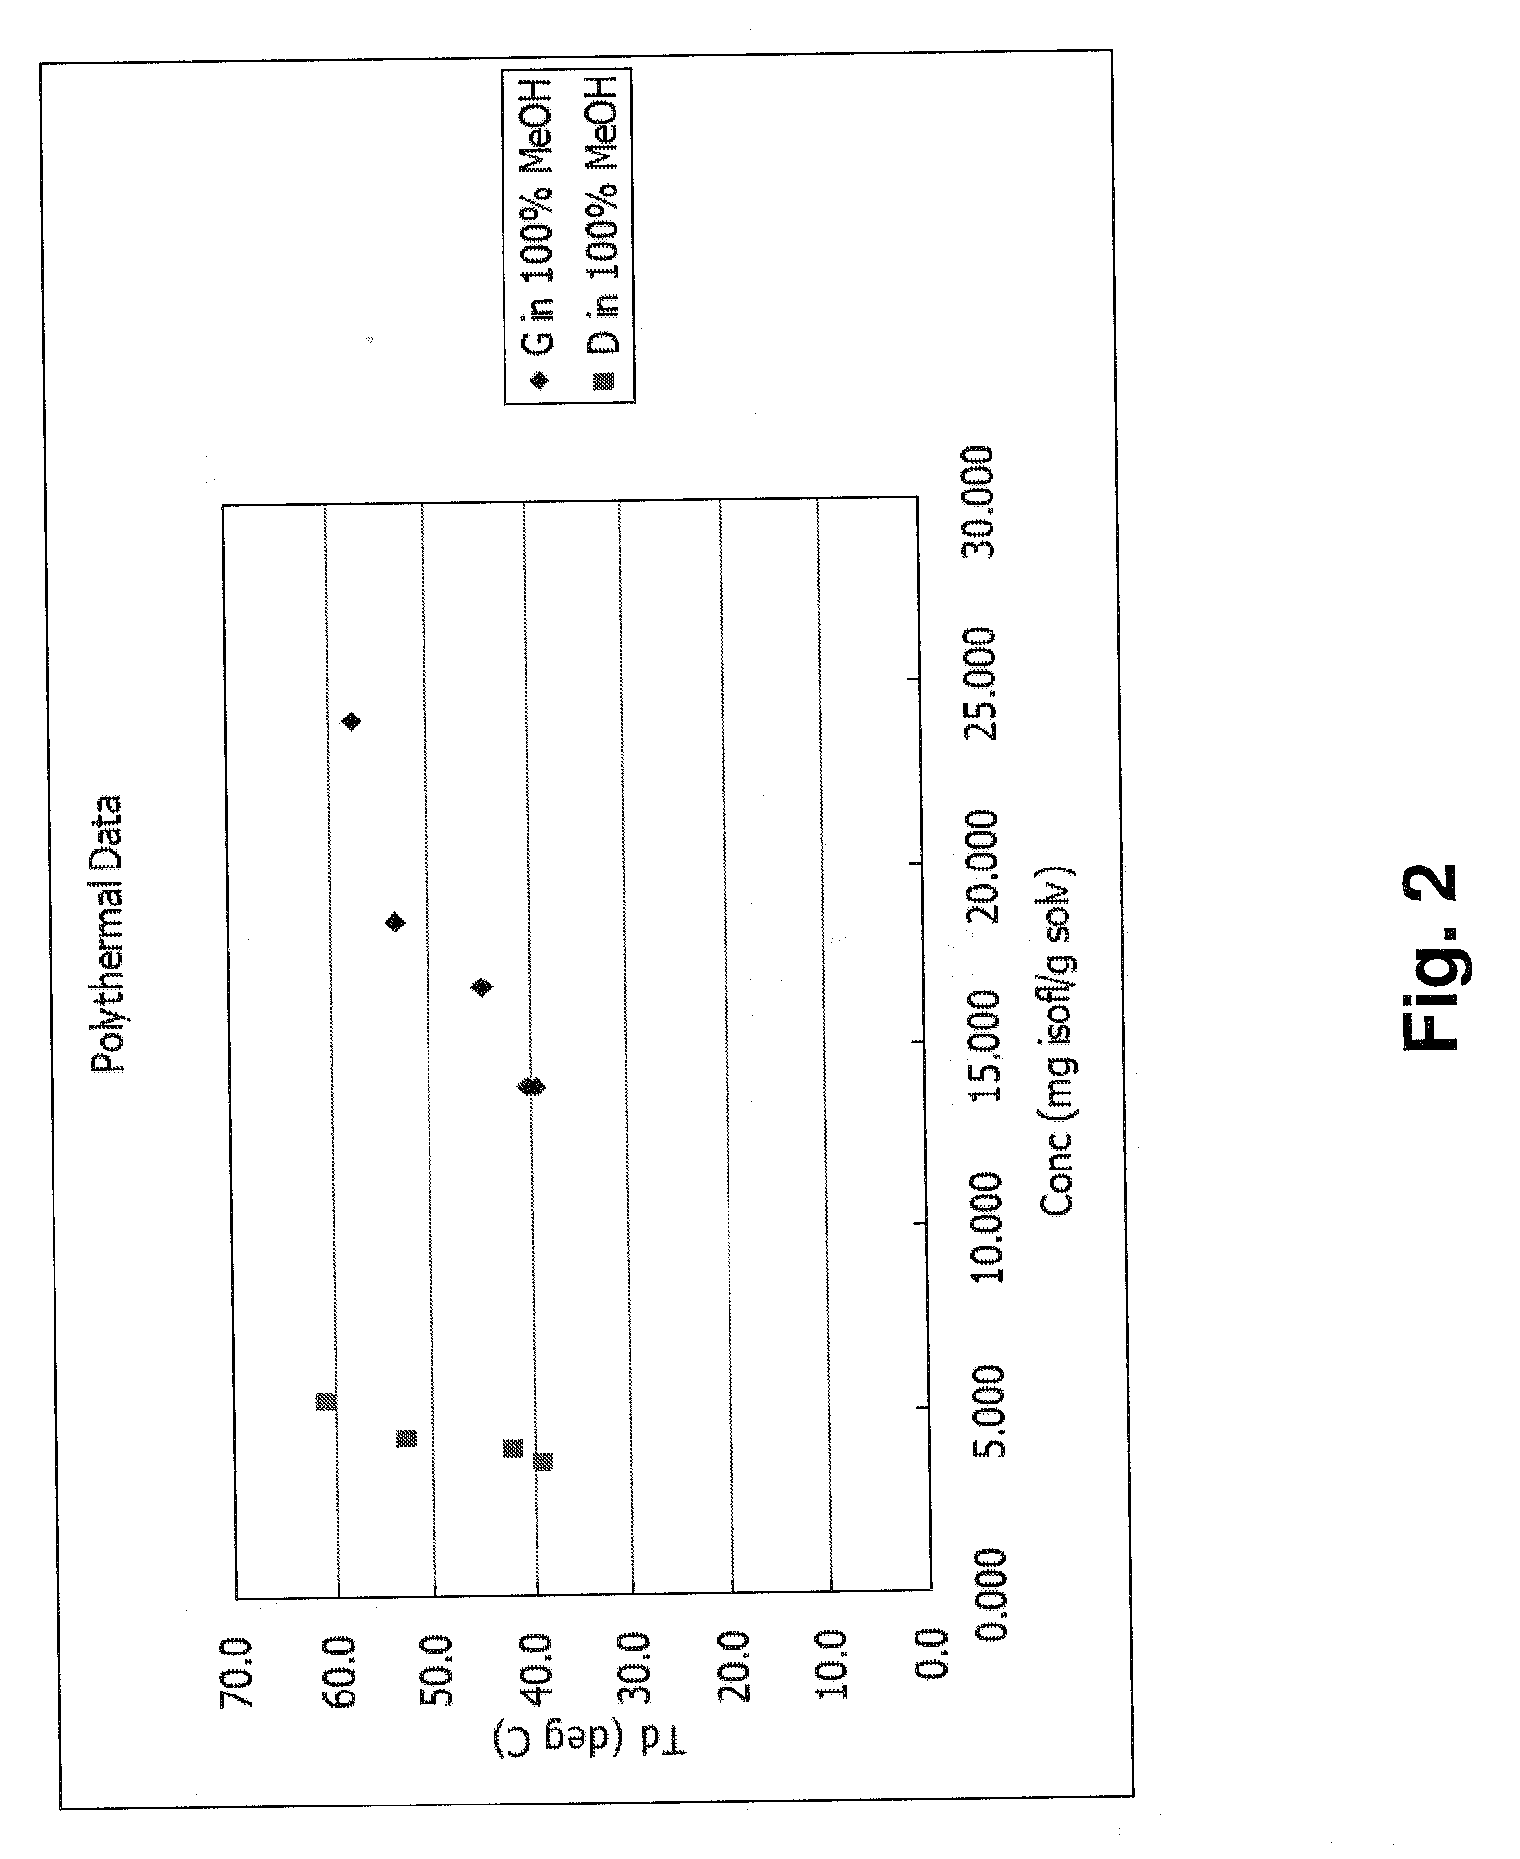 Health Care Product containing Isoflavone Aglycones and Method of Producing the Same